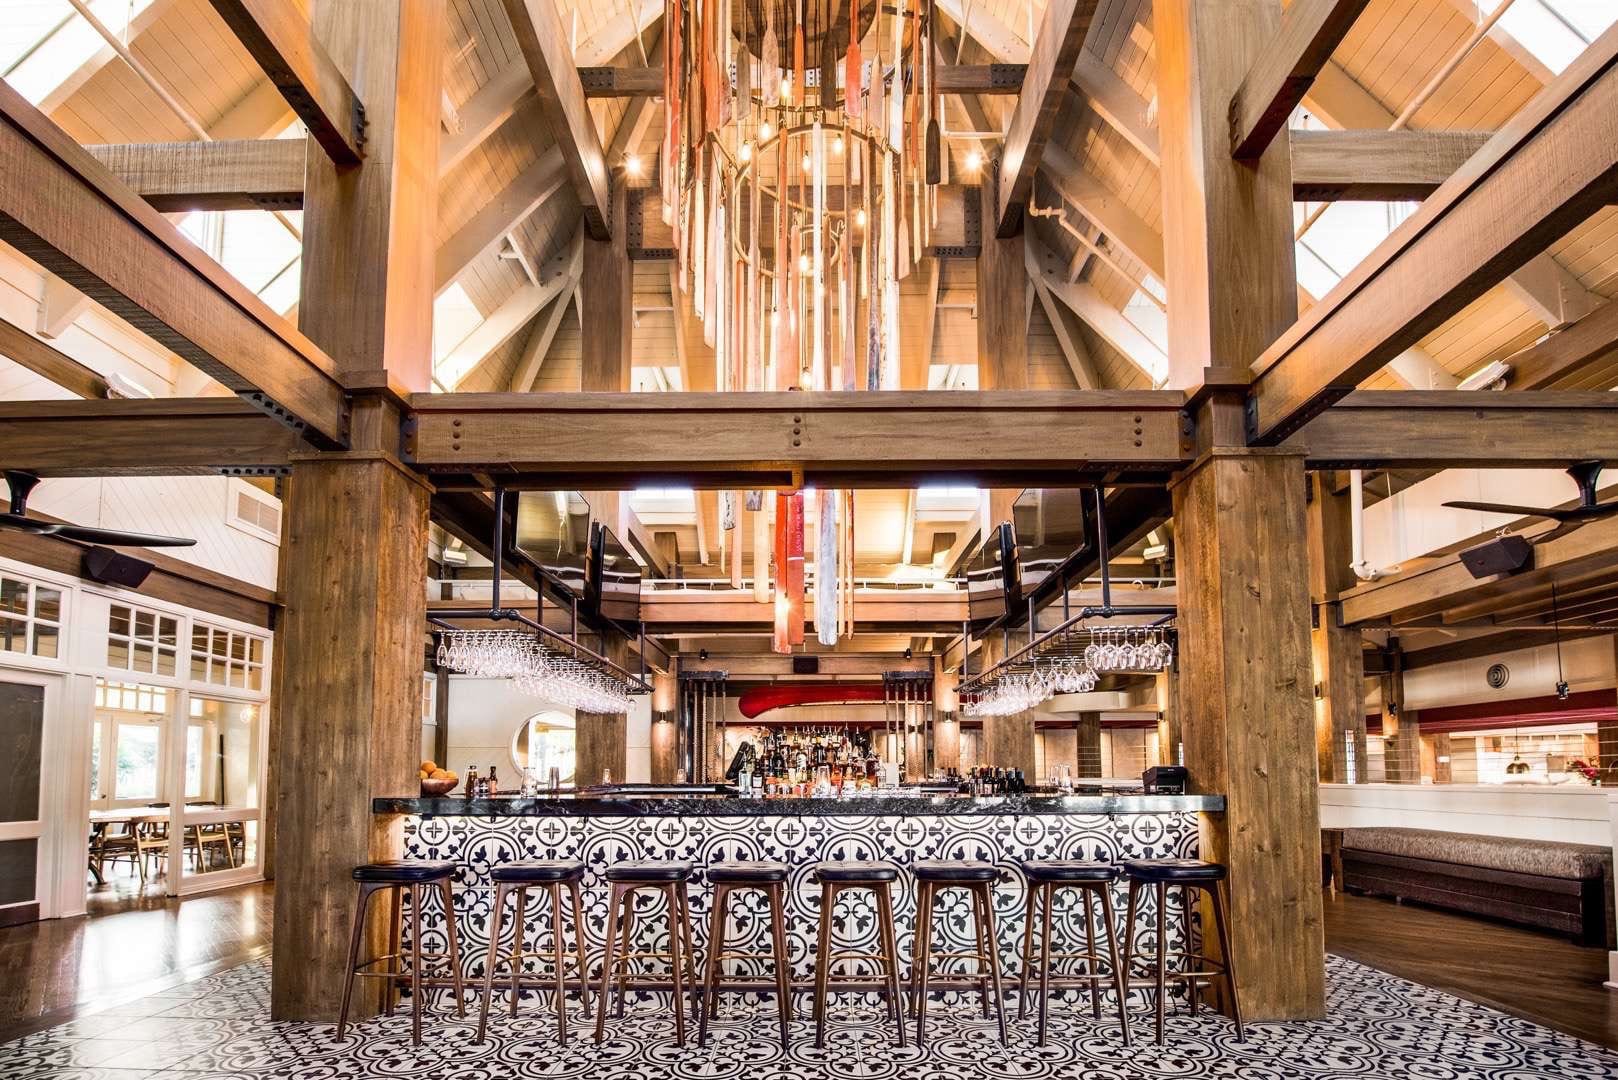 CI Studios Portfolio The Restaurant People Chandelier with oars hanging from the ceiling over a bar with many barstools and tiled